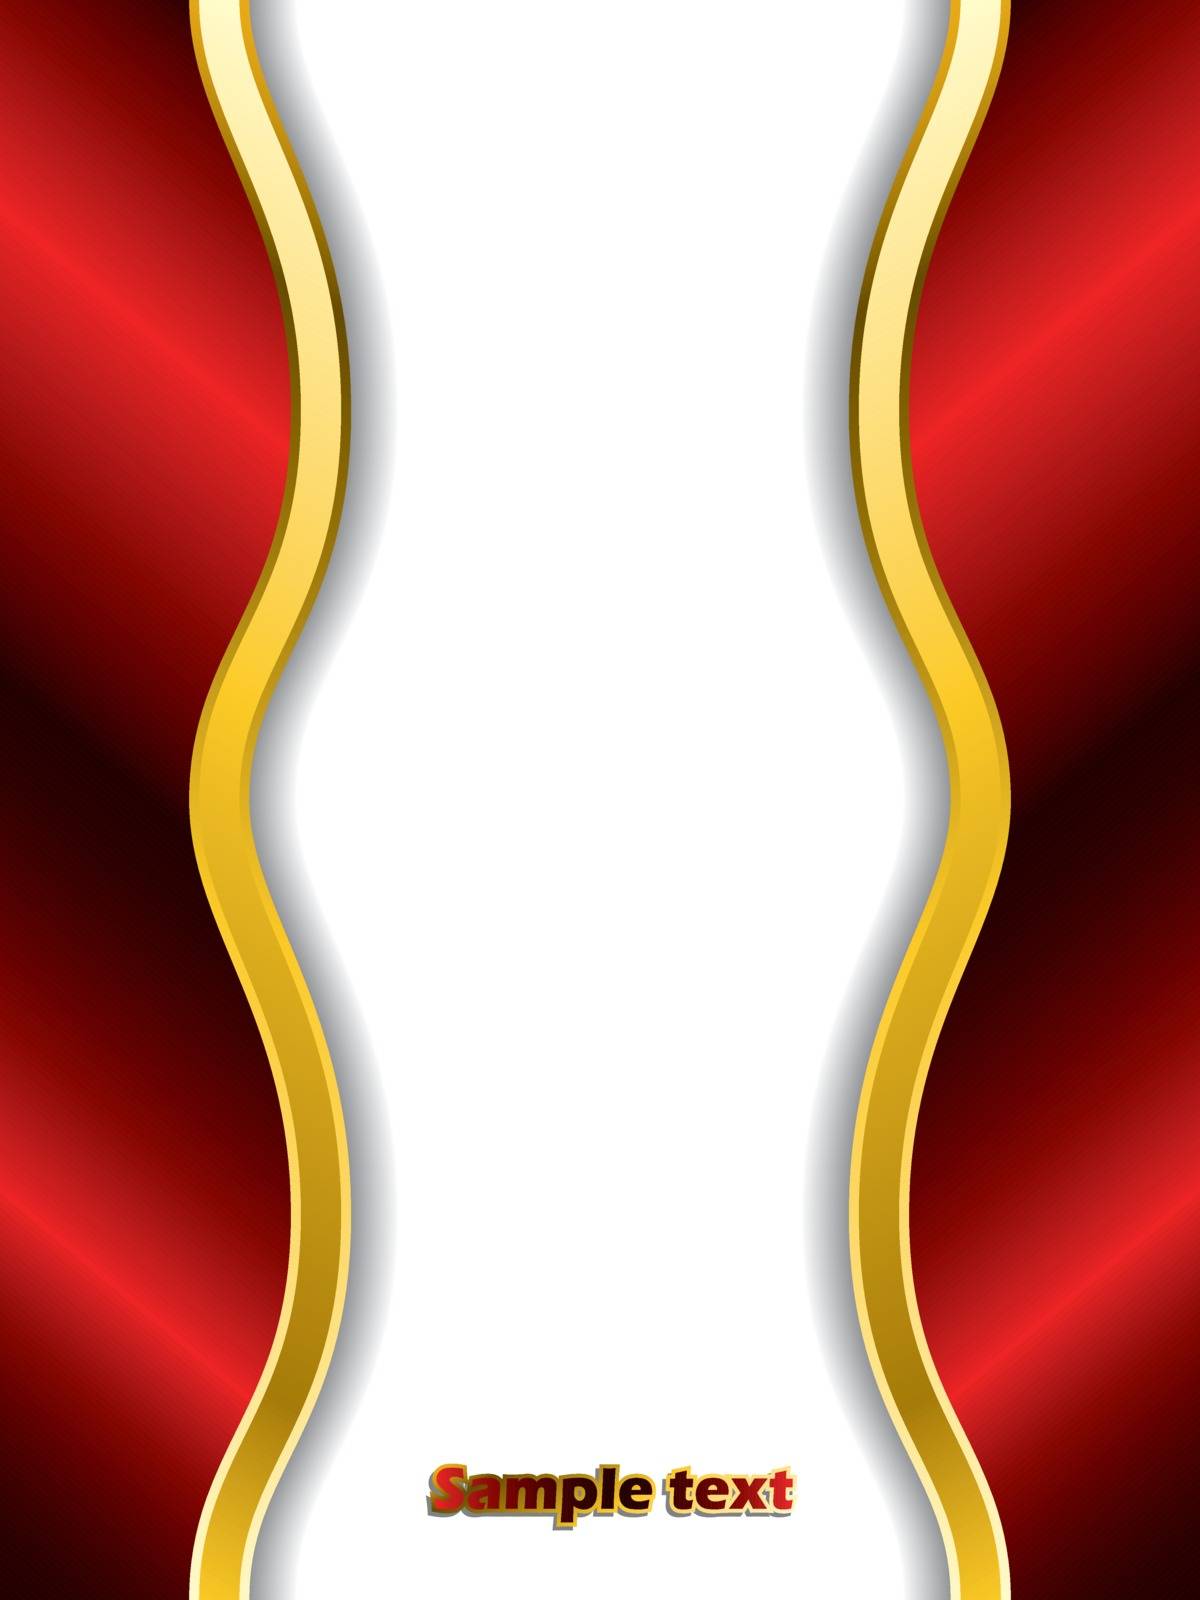 Shiny red ribbon background with gold trimming